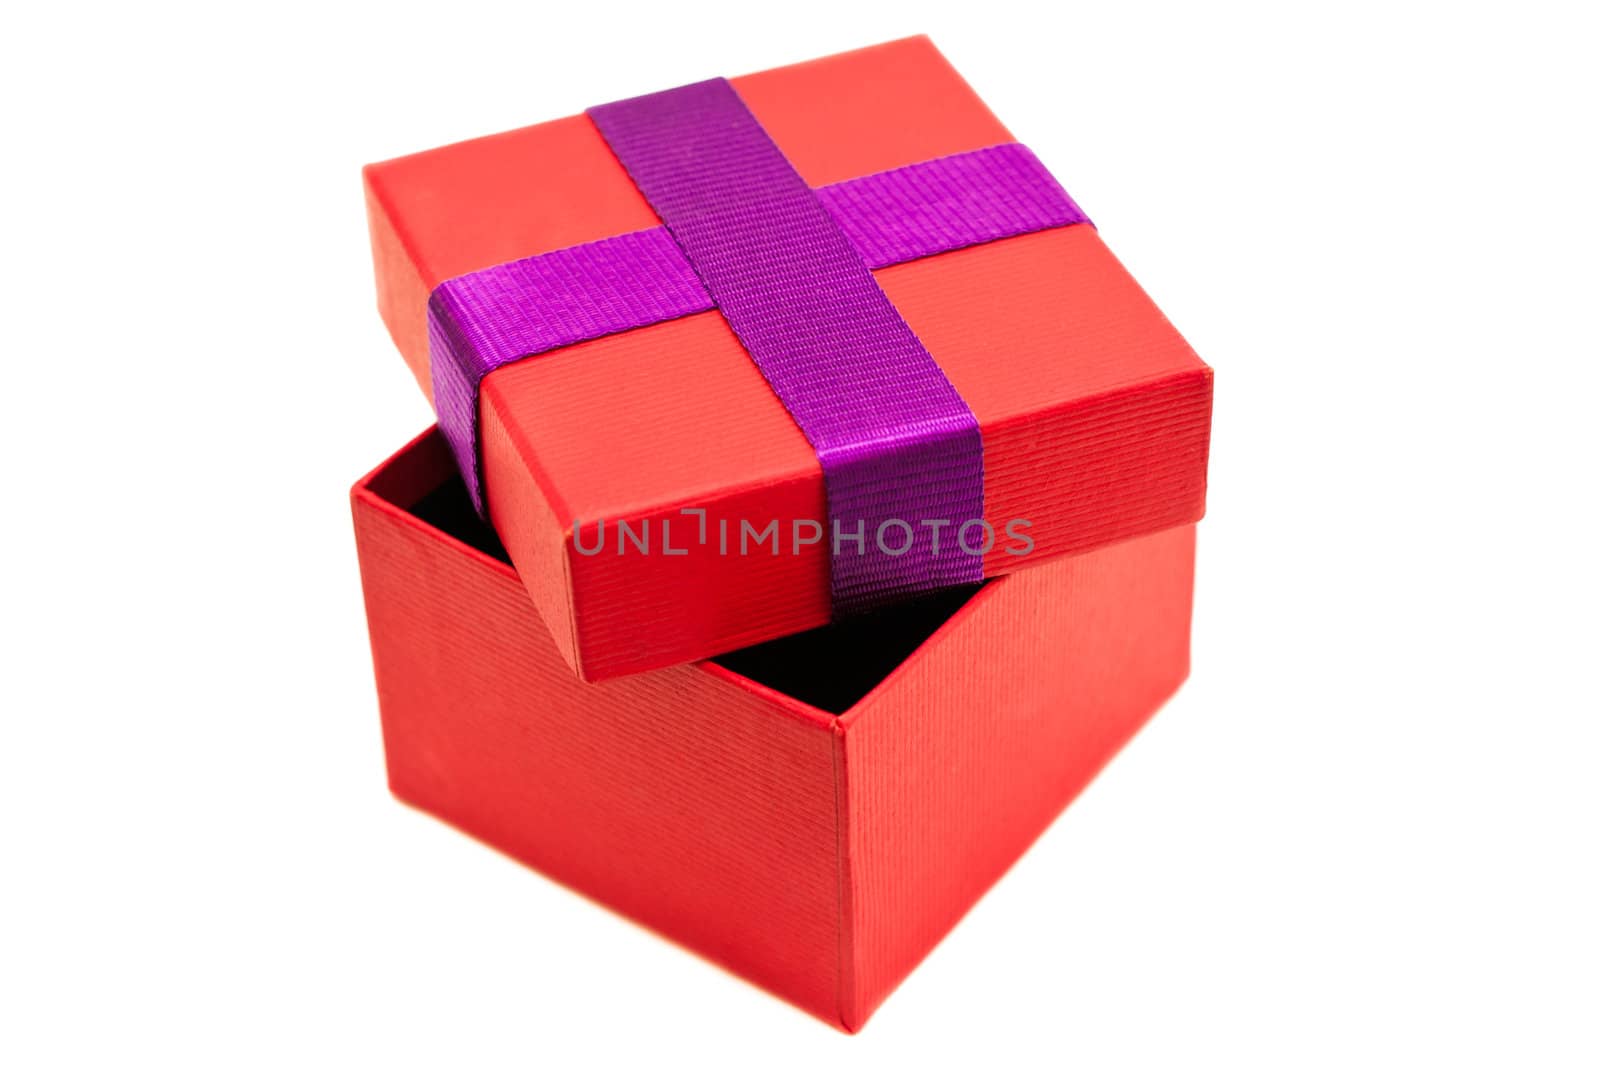 Isolated red purple opened present box by oguzdkn